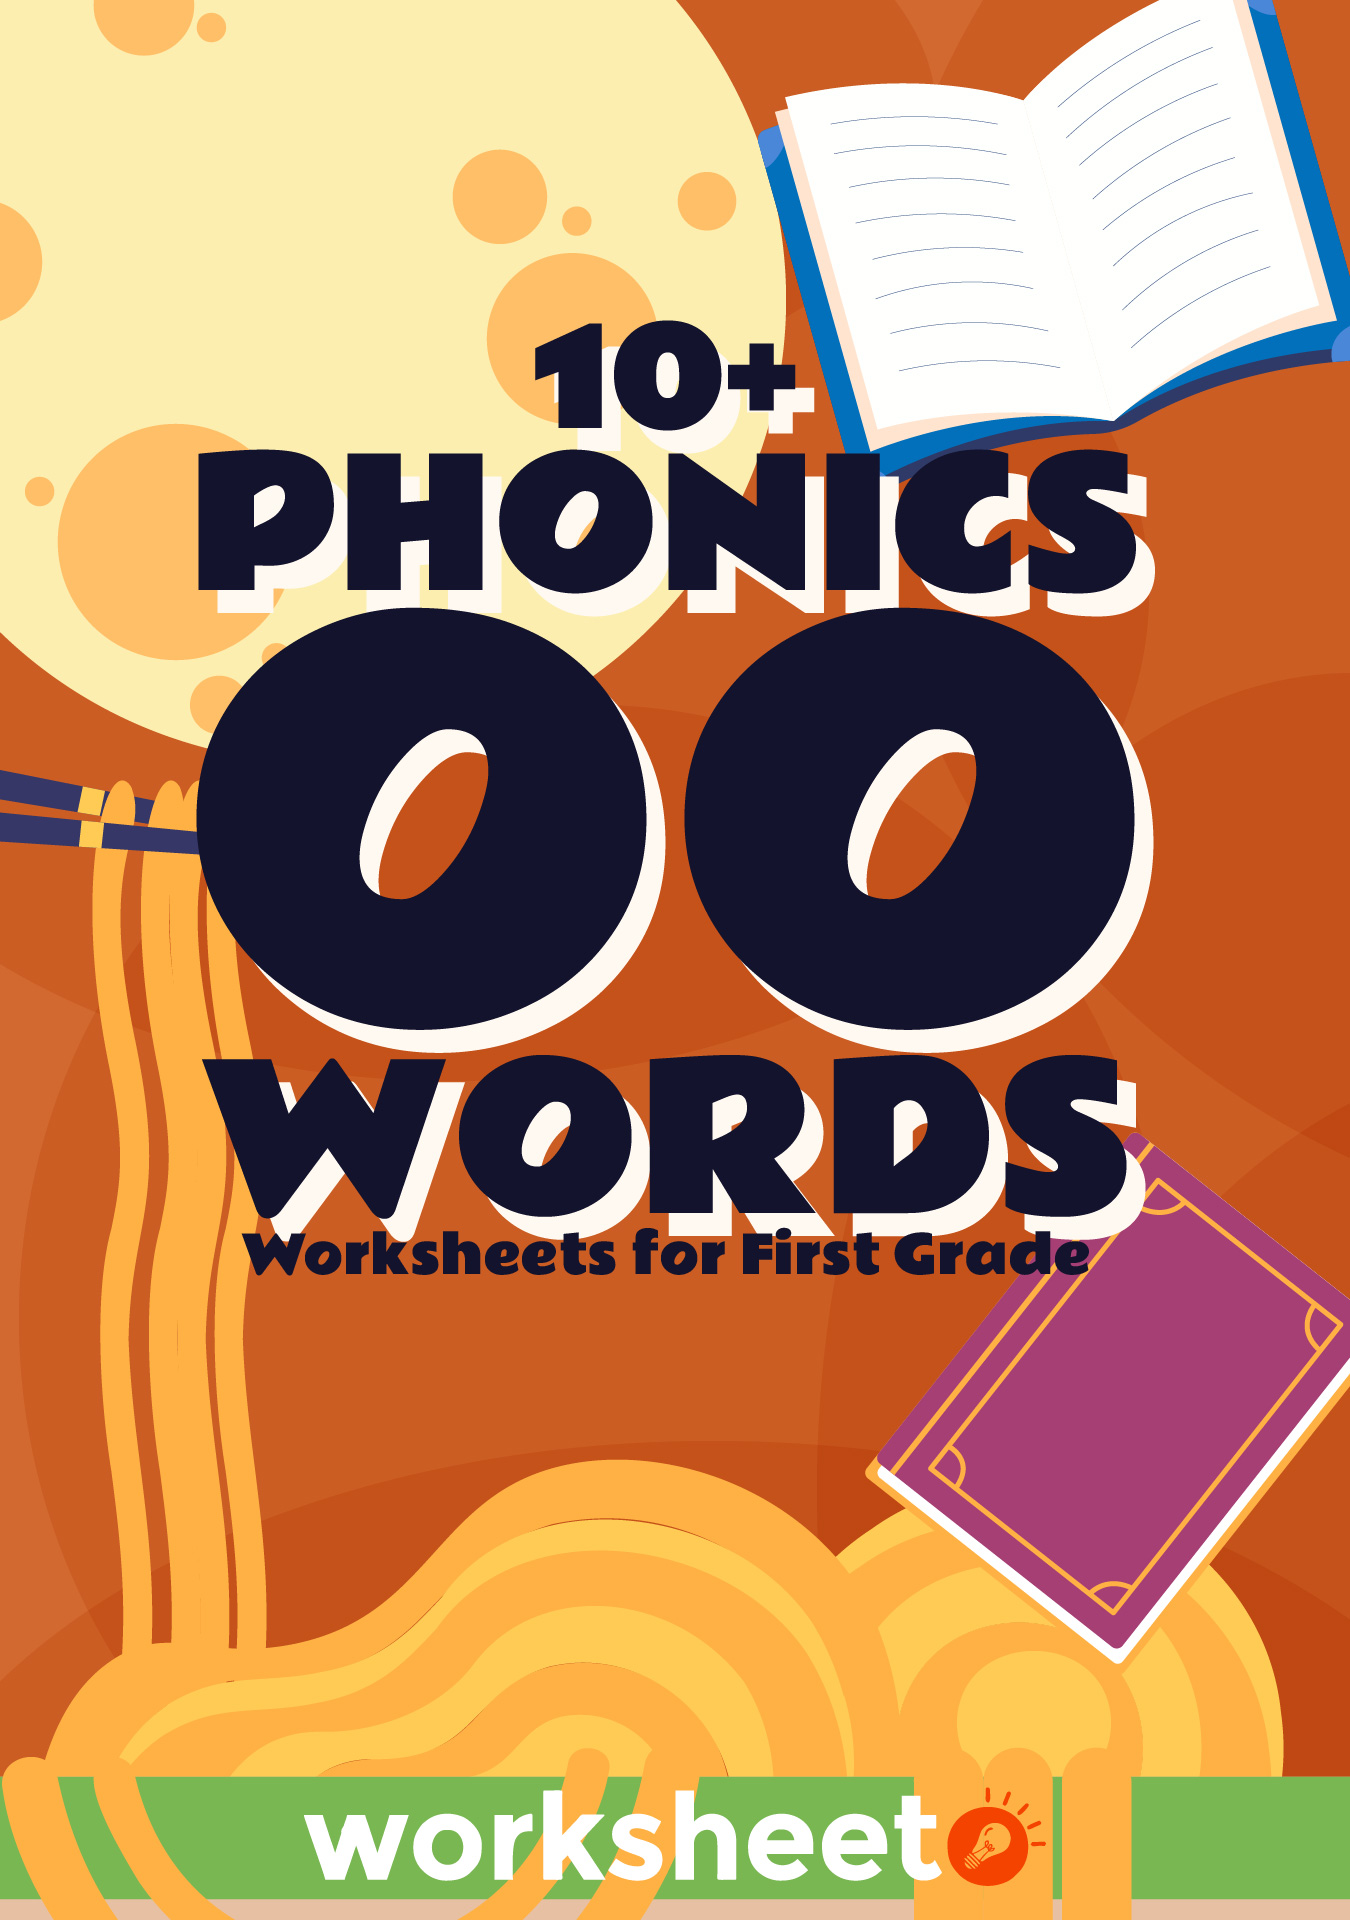 Phonics Oo Words Worksheets for First Grade